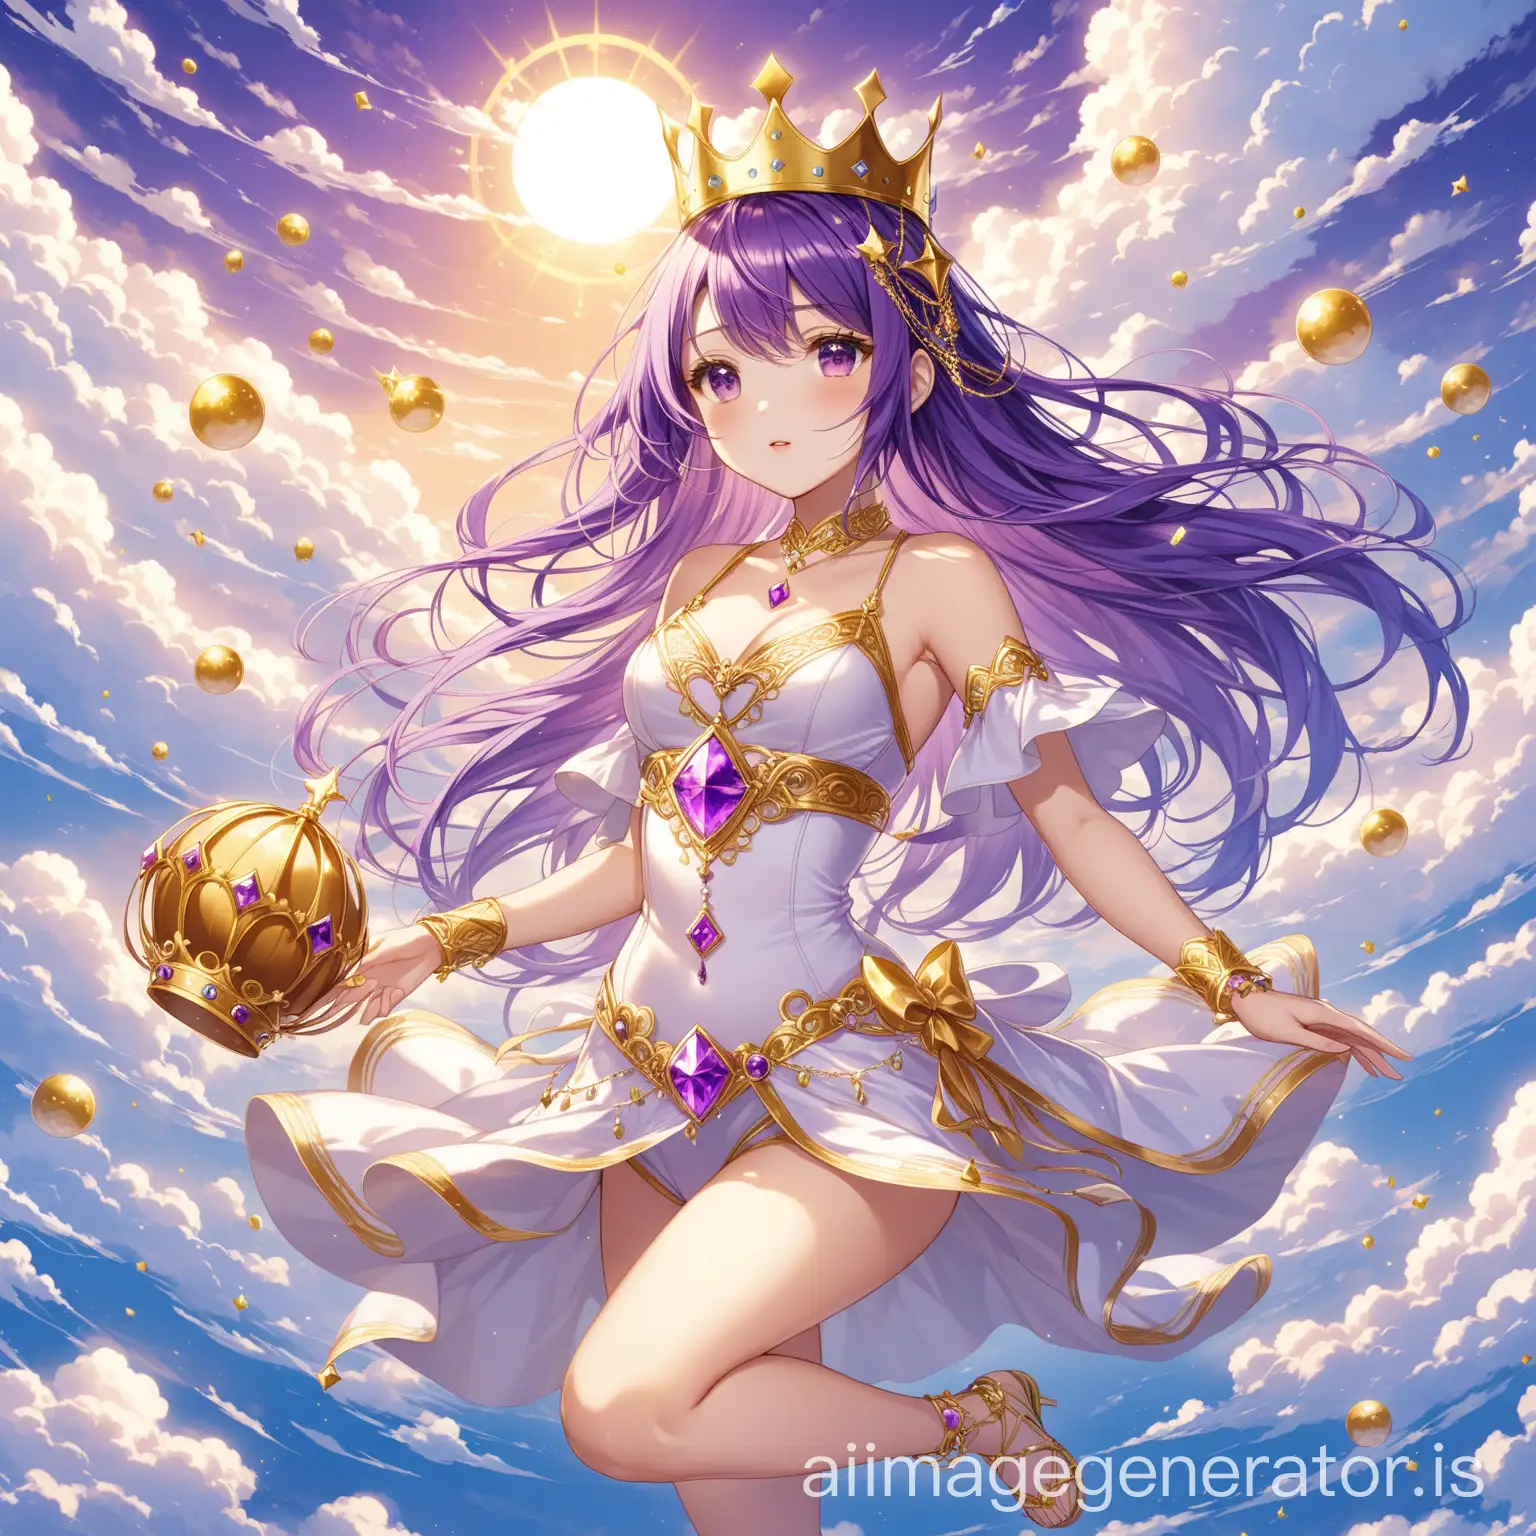 Ethereal-Anime-Goddess-with-Purple-Hair-and-Golden-Crown-Floating-in-the-Clouds